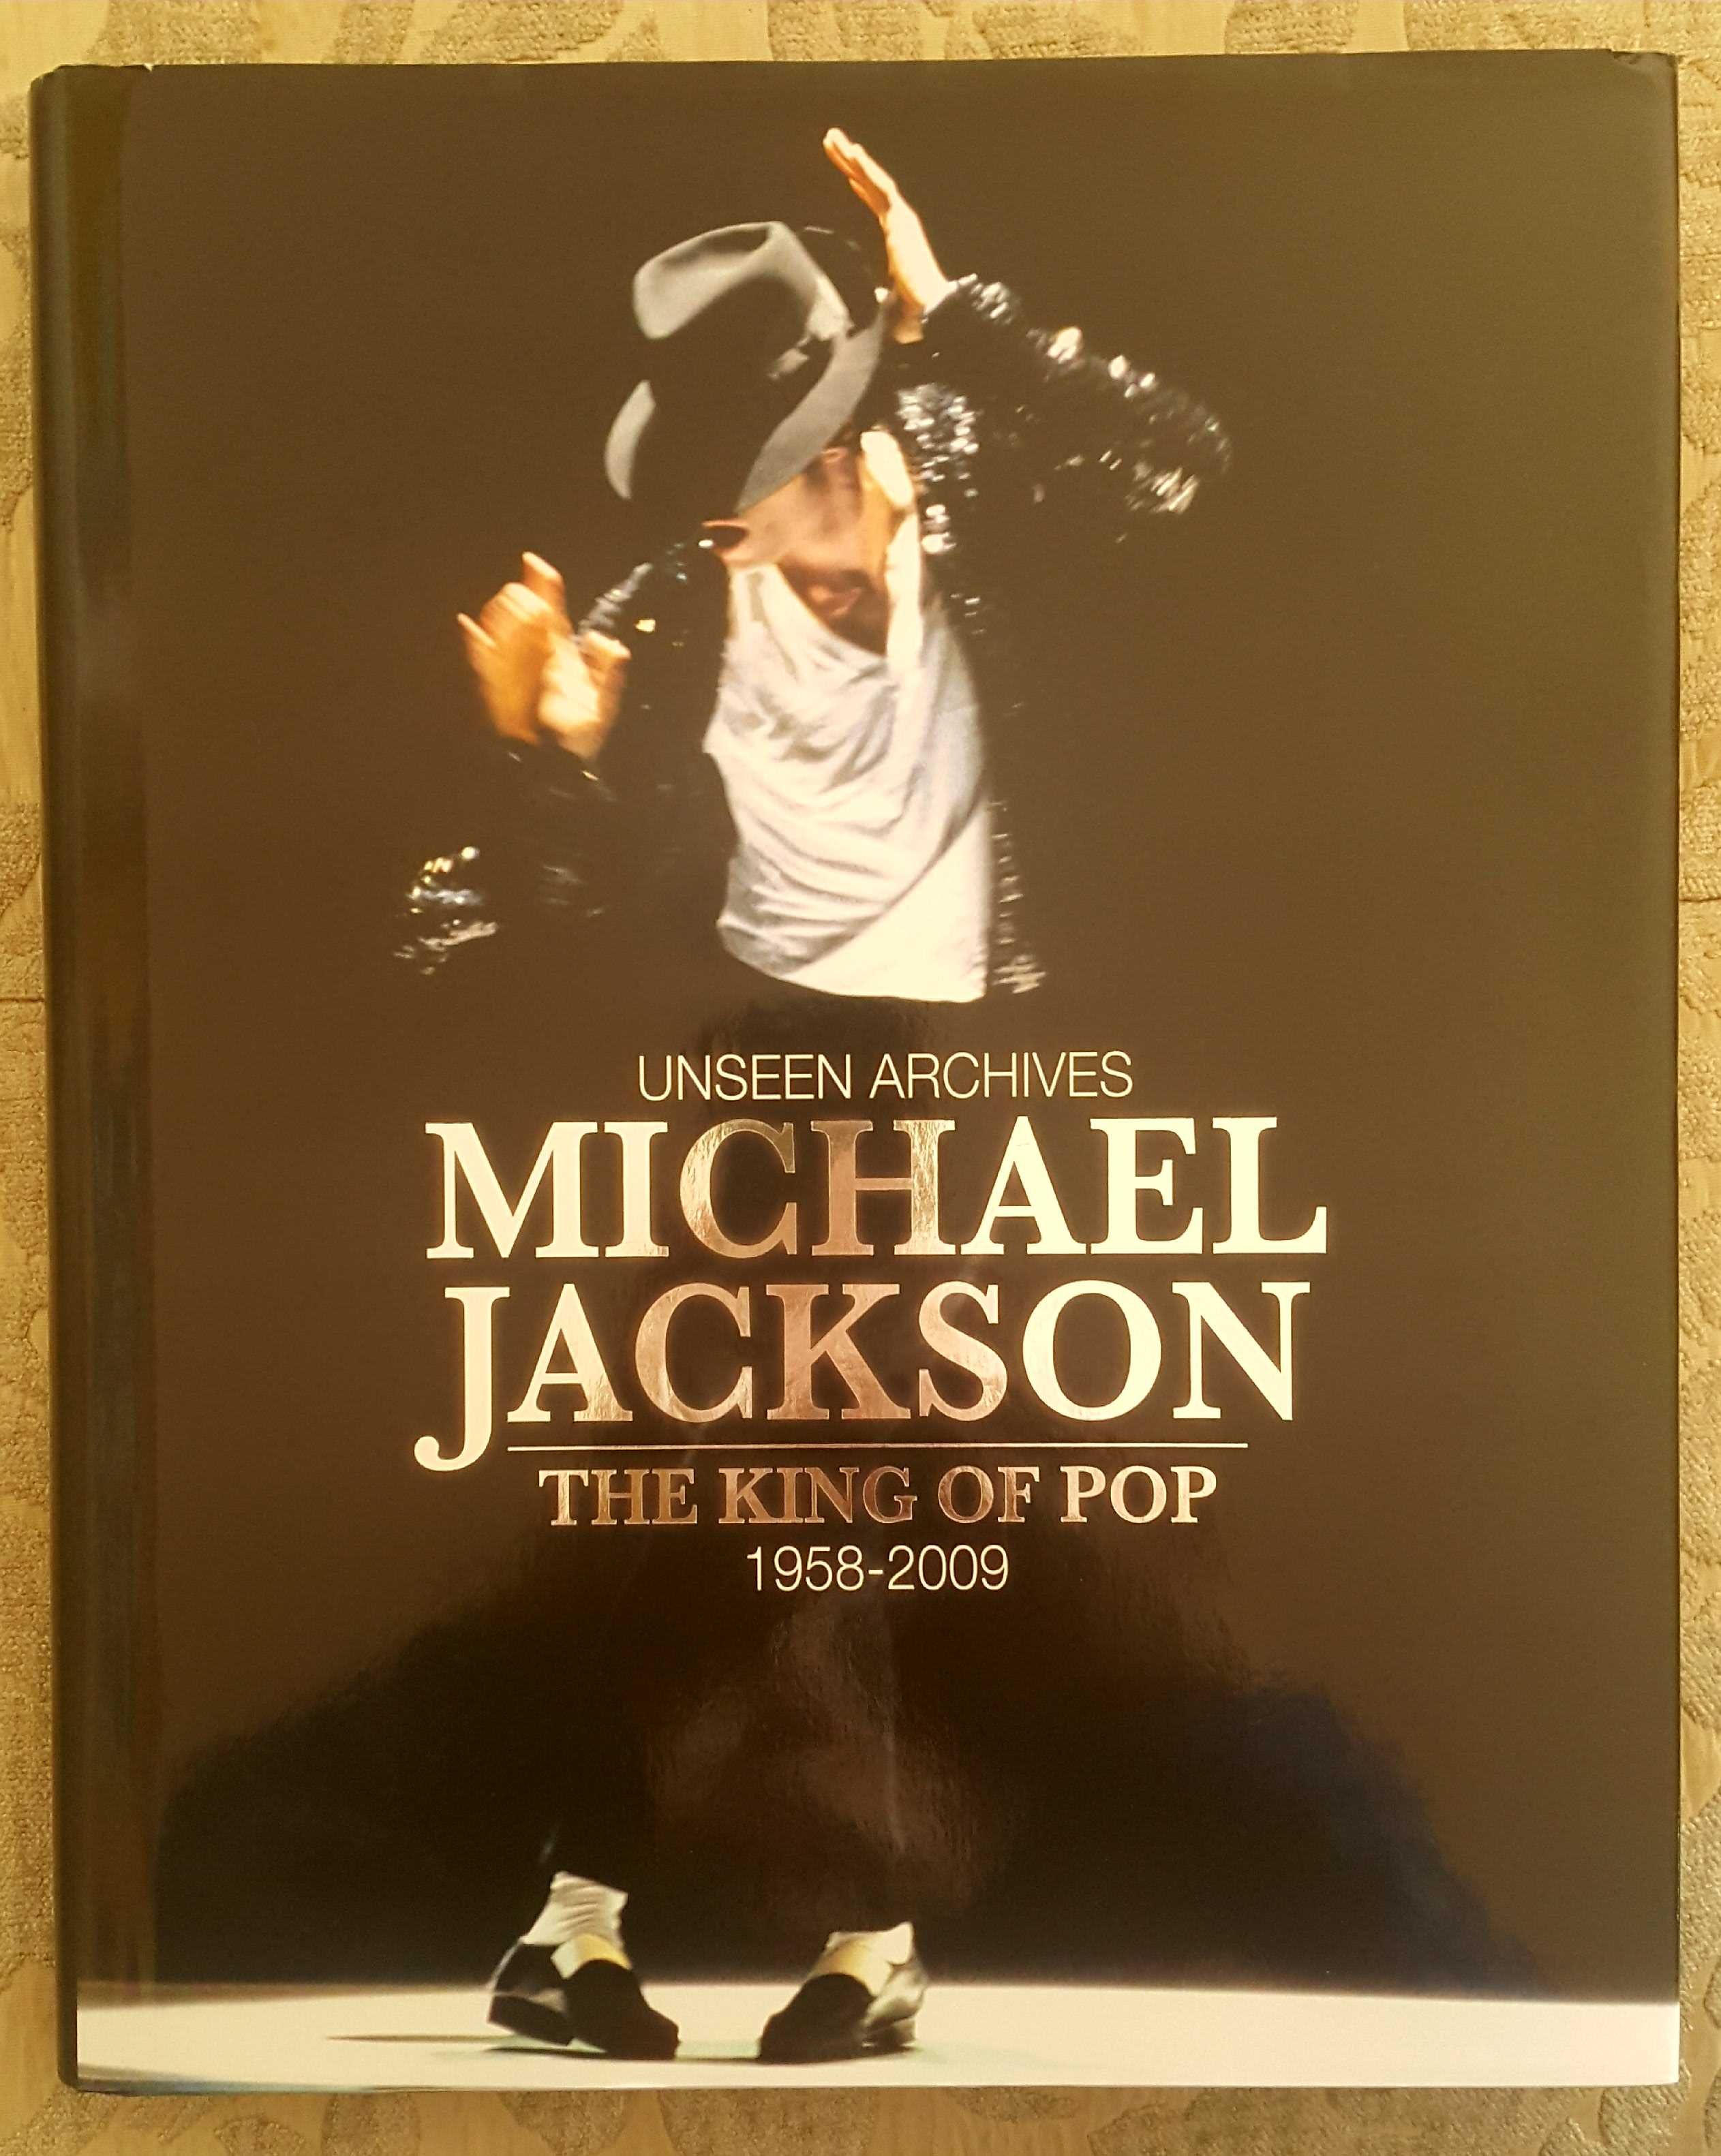 Michael Jackson The King of Pop 1958 - 2009 (Unseen Archives)